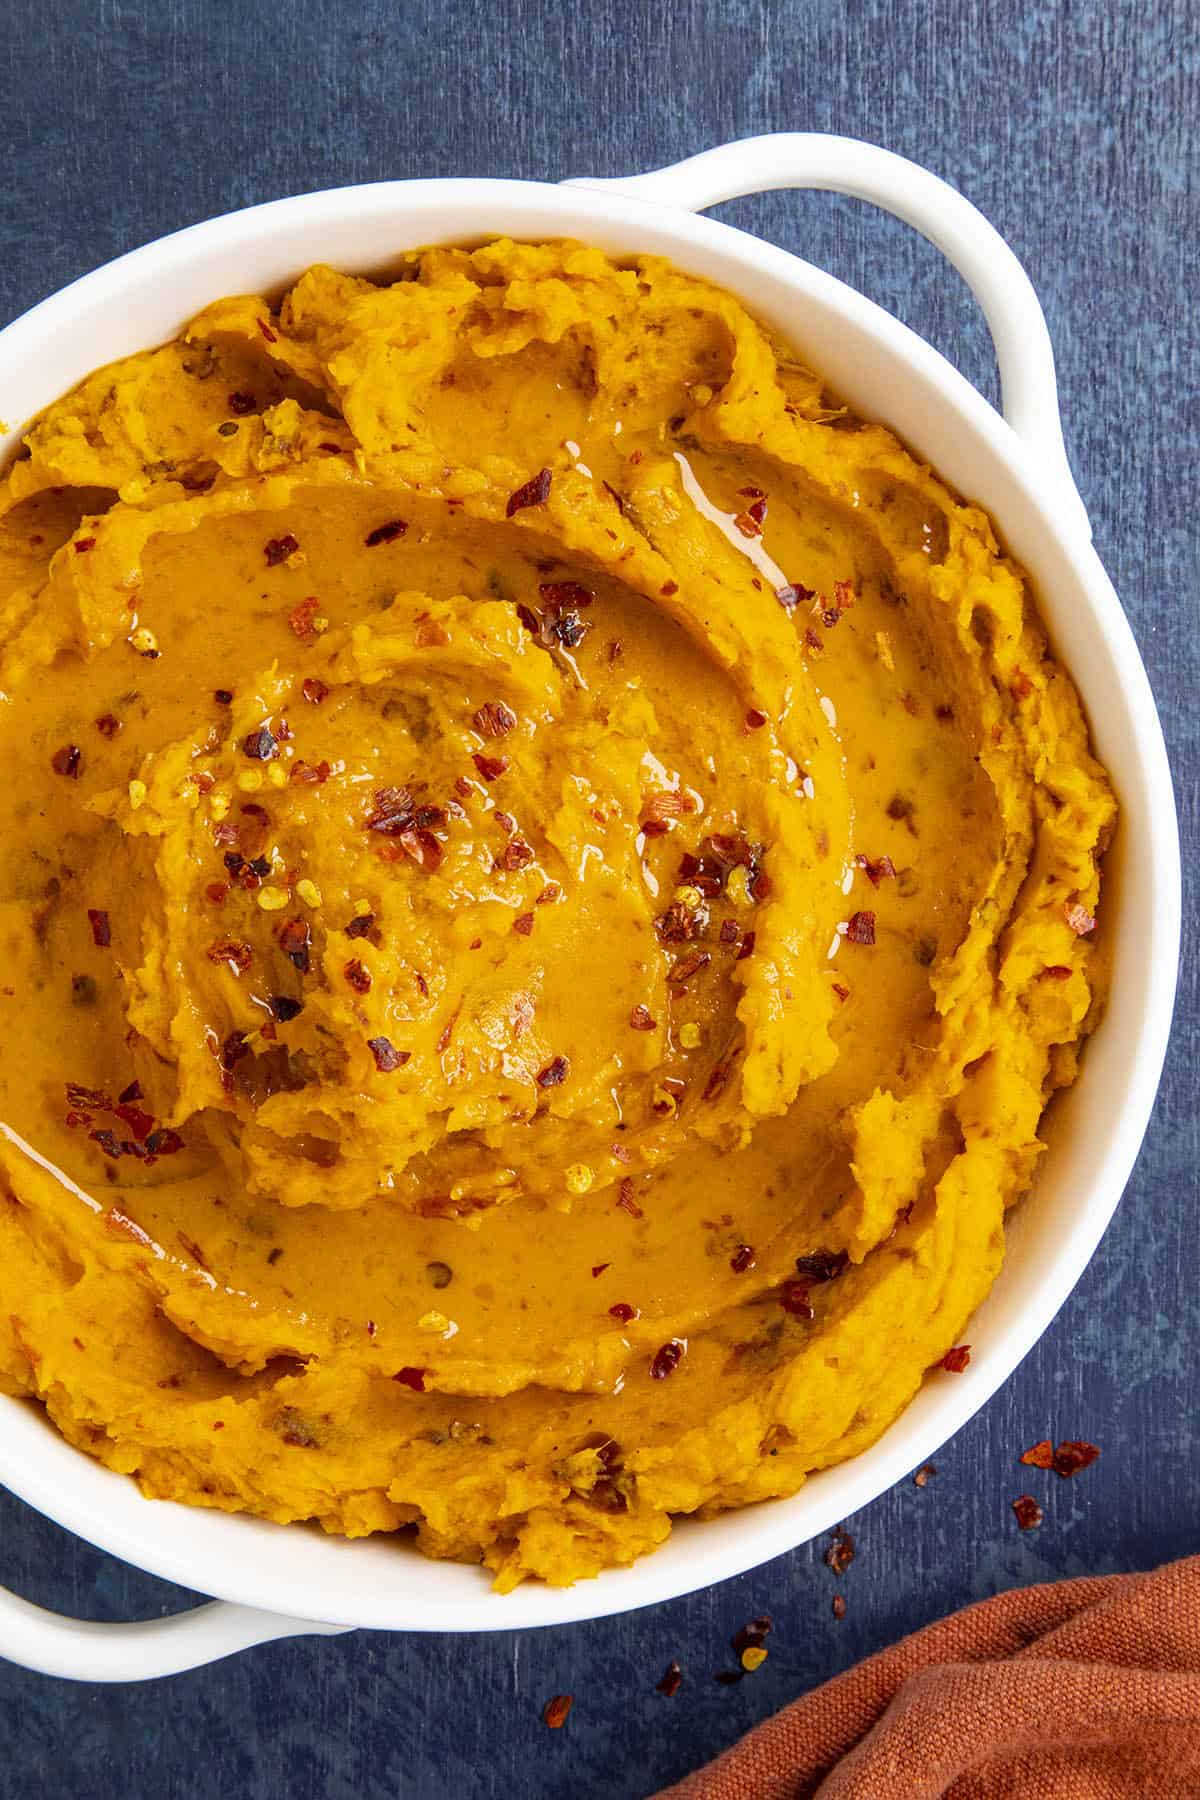 Chipotle Mashed Sweet Potatoes in a bowl, topped with chili flakes and olive oil